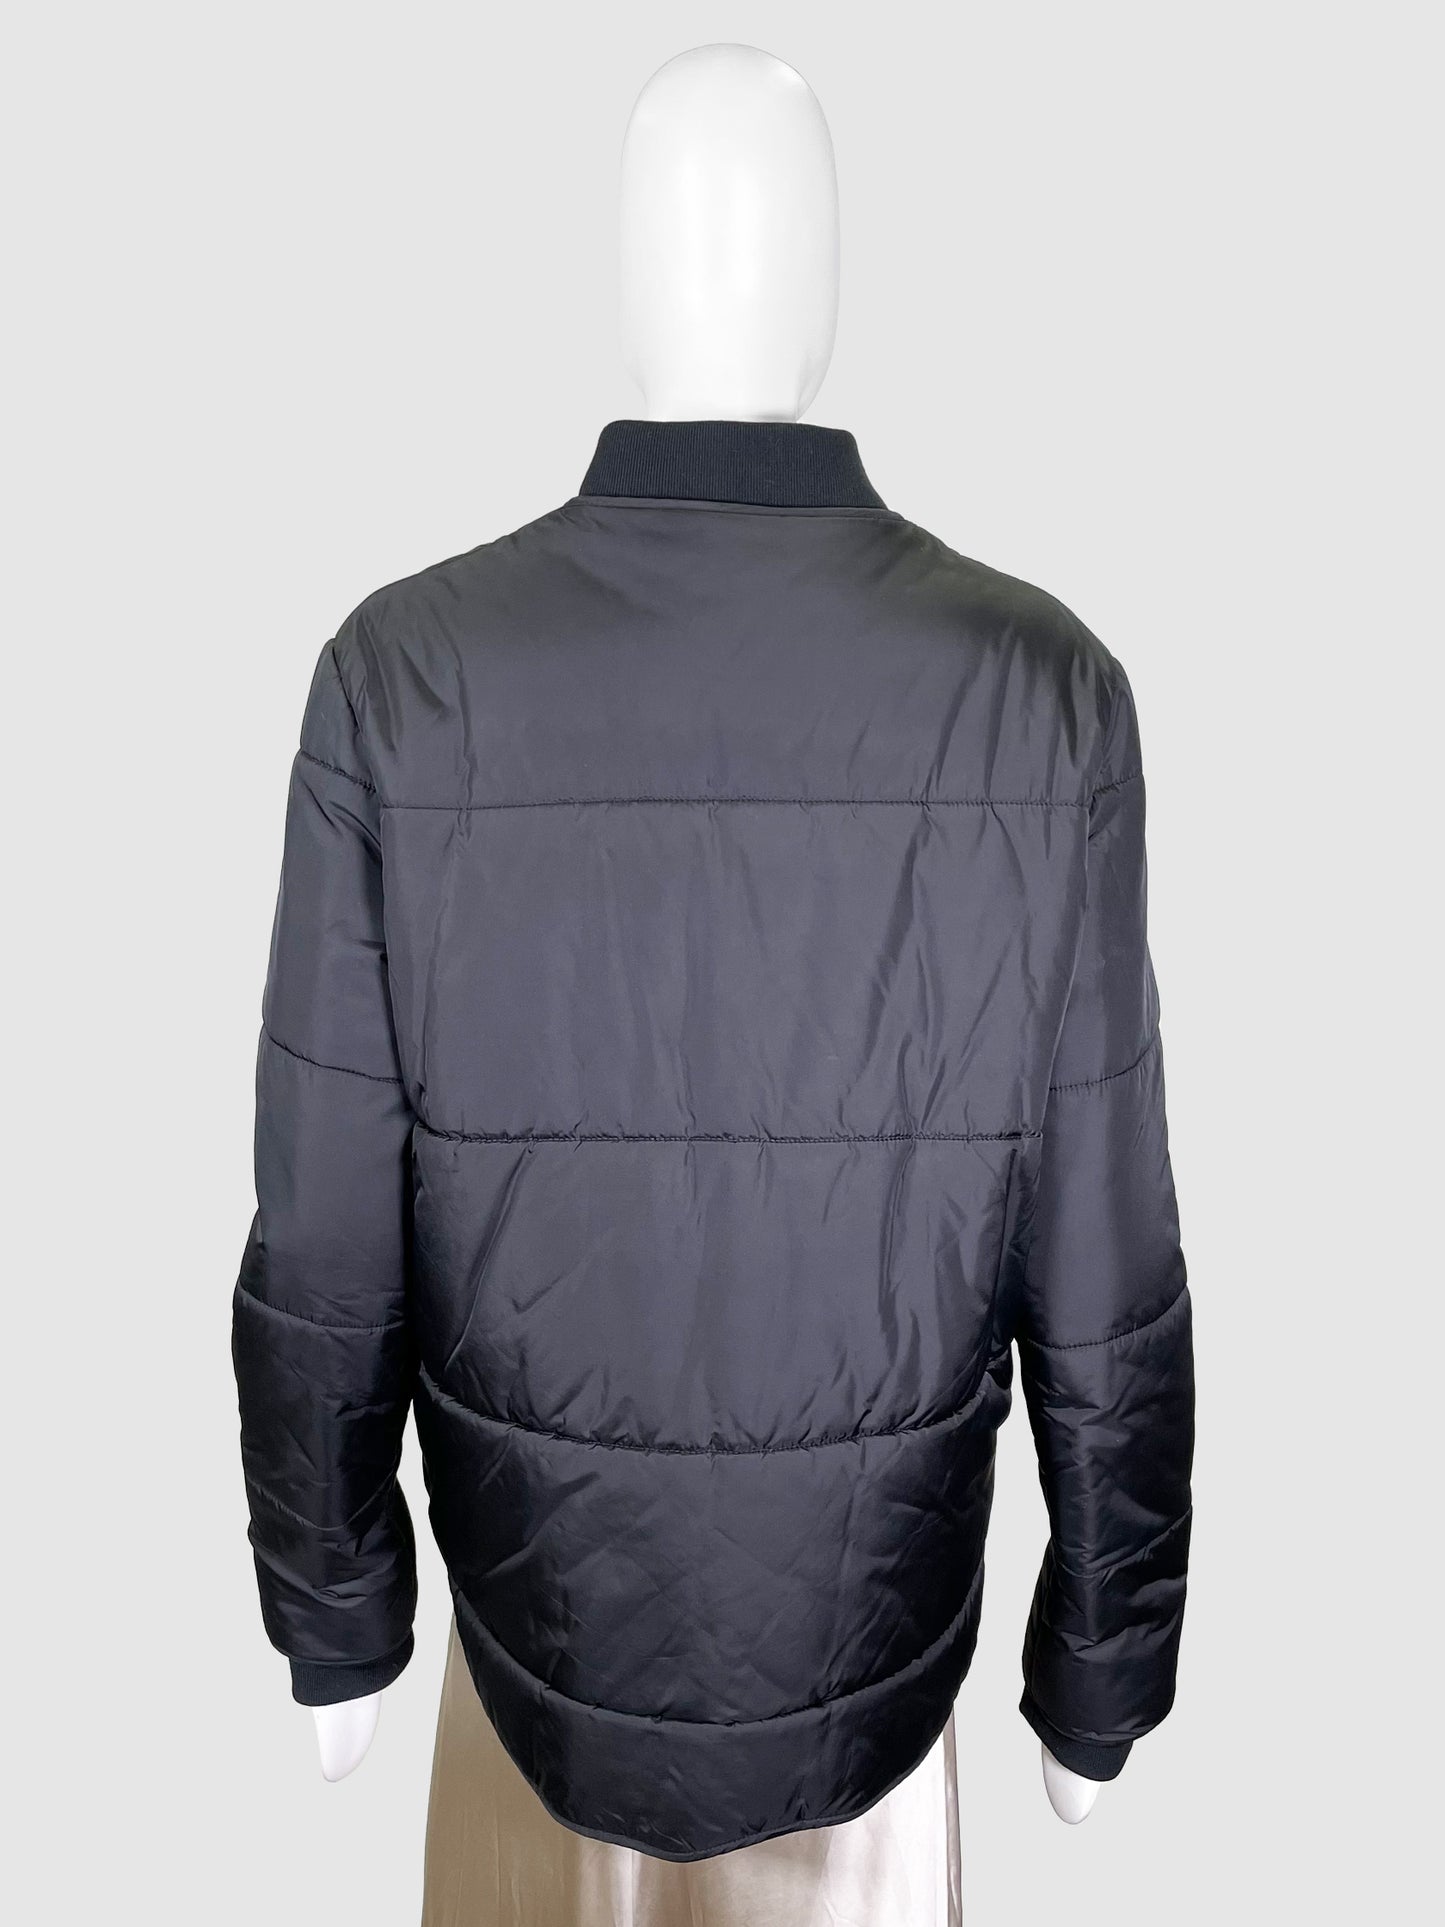 Acne Studios Quilted Bomber Jacket - Size M